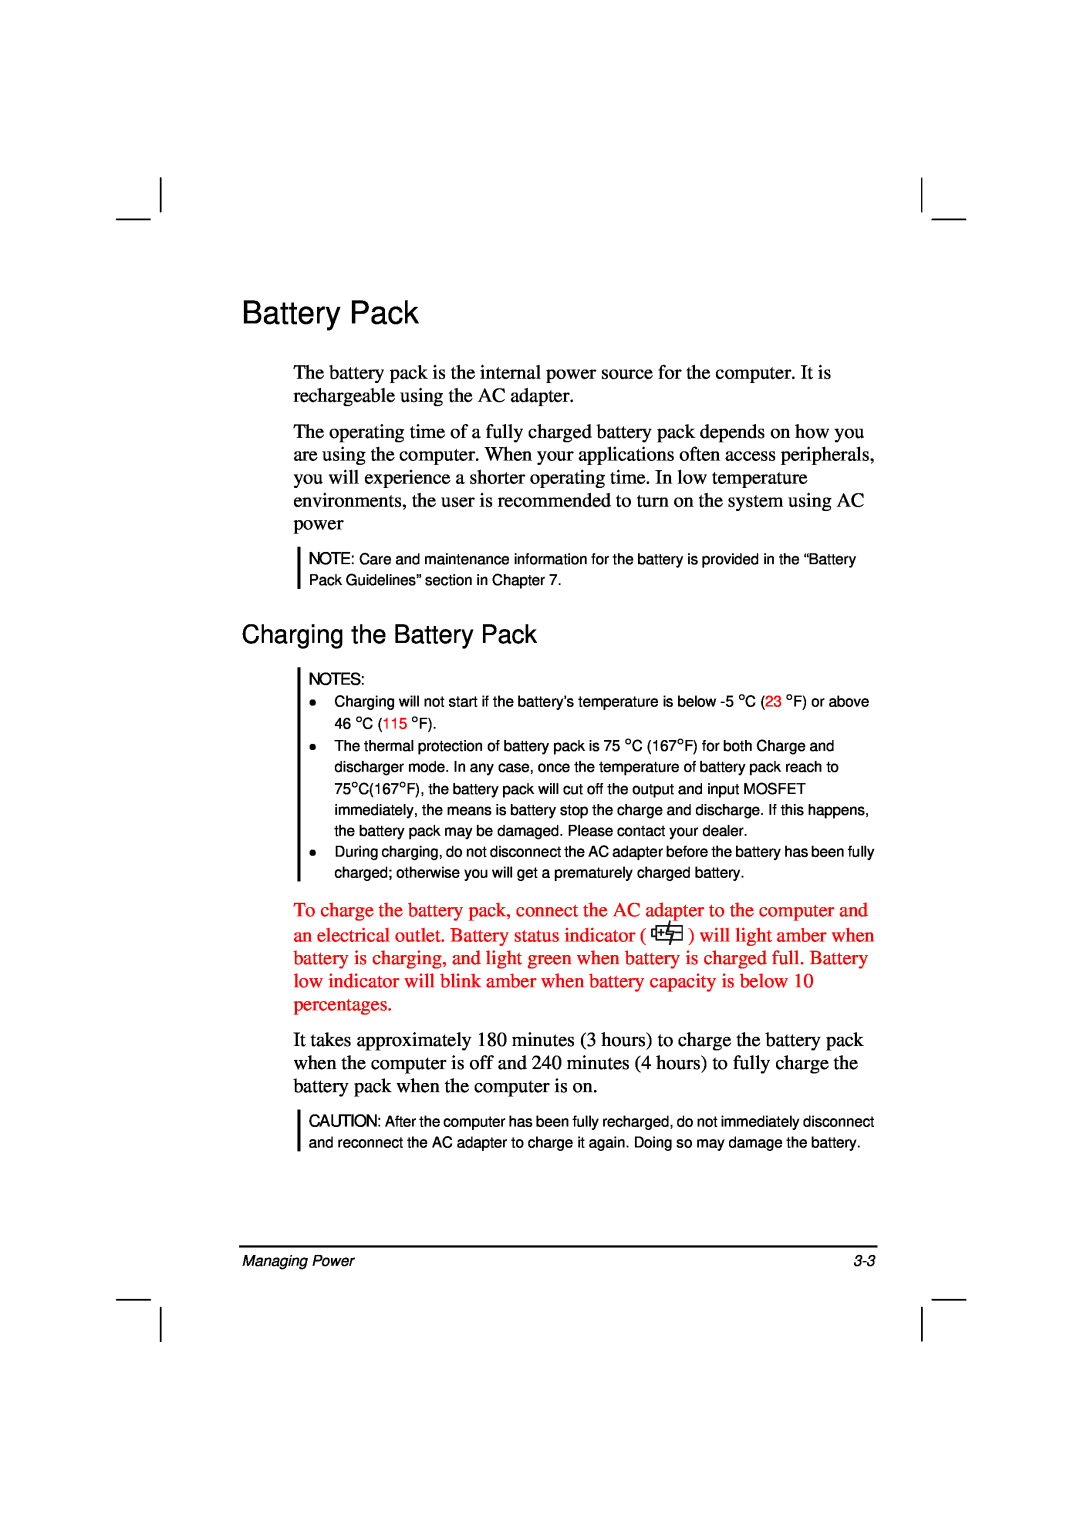 Casio HK1223 owner manual Charging the Battery Pack 